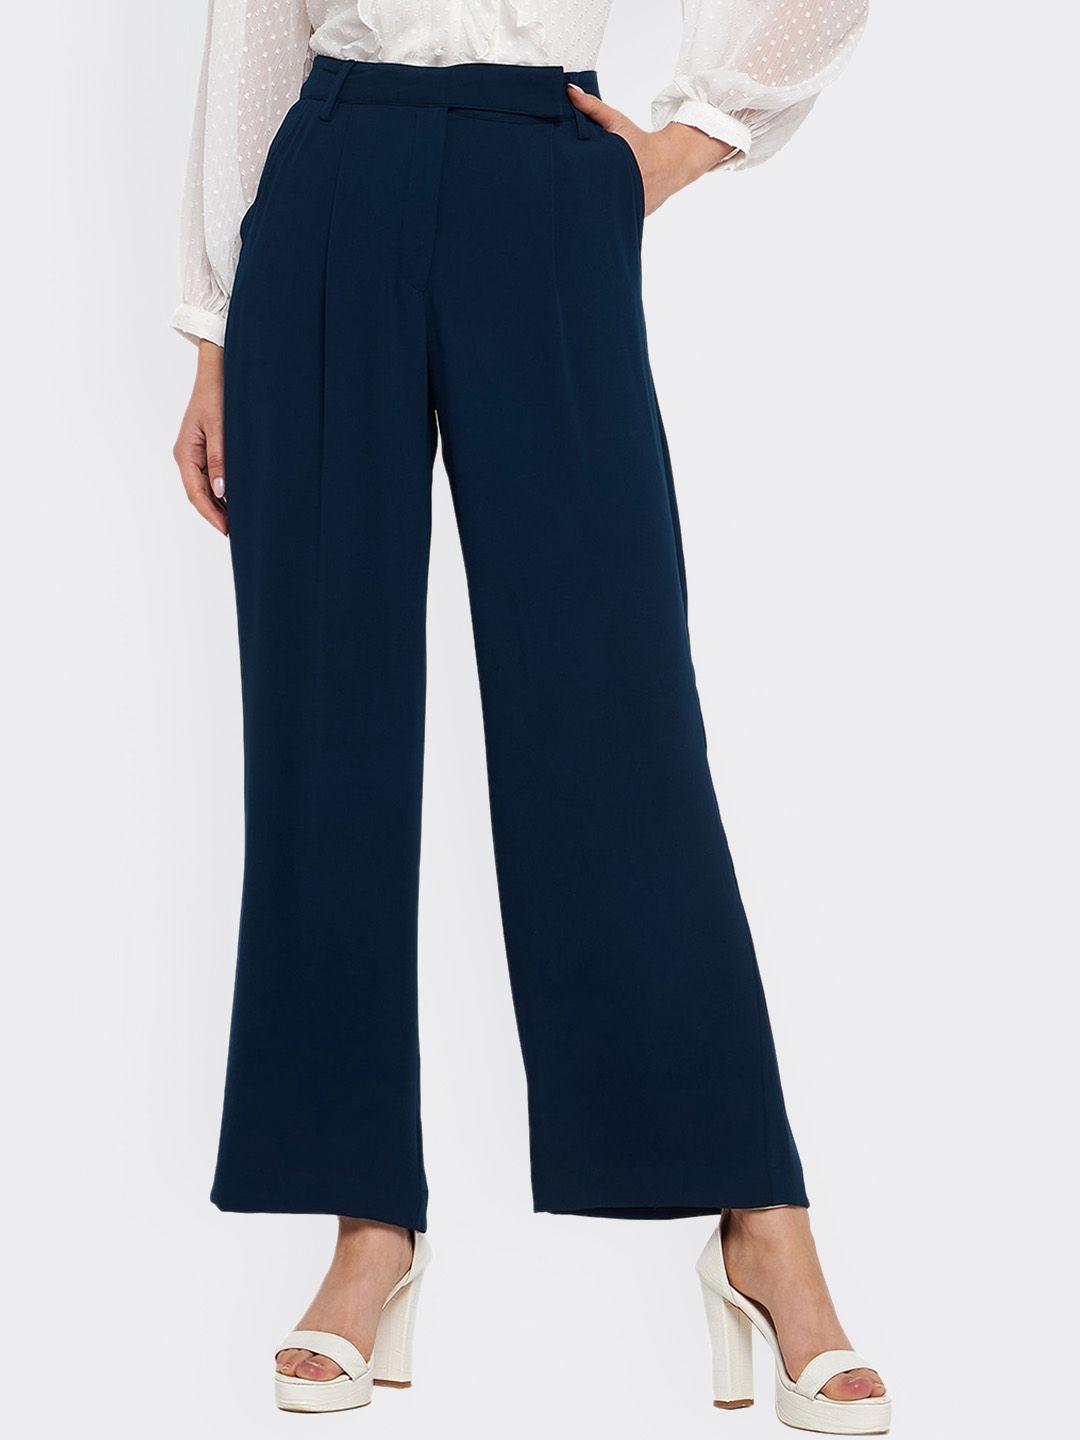 antheaa-women-classic-loose-fit-high-rise-pleated-trousers